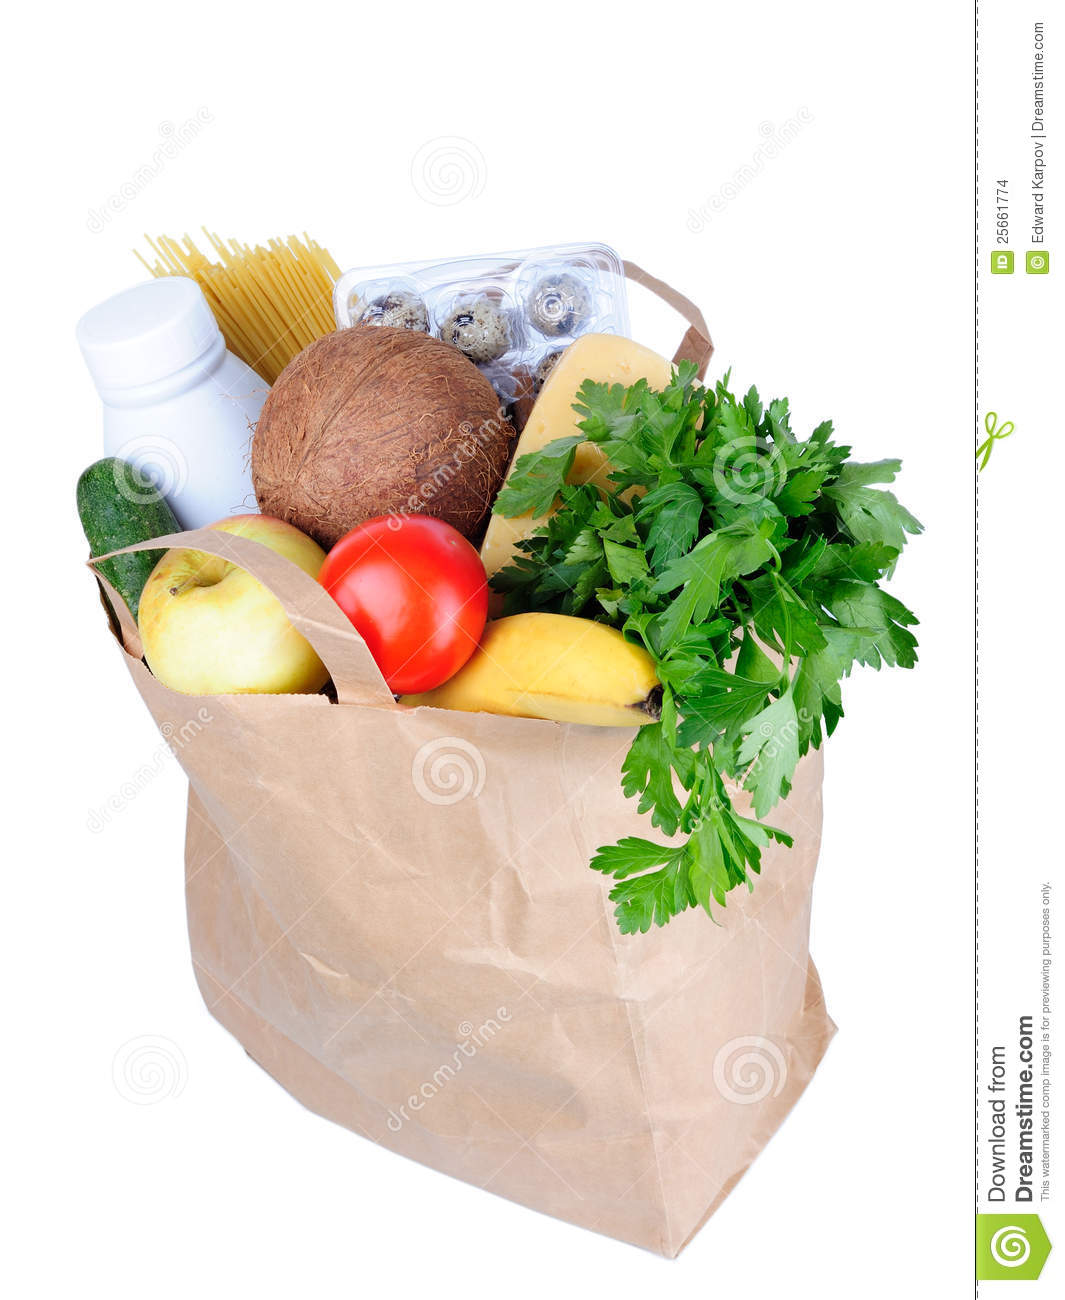 Paper Bag With Food On A White Mr No Pr No 2 941 1